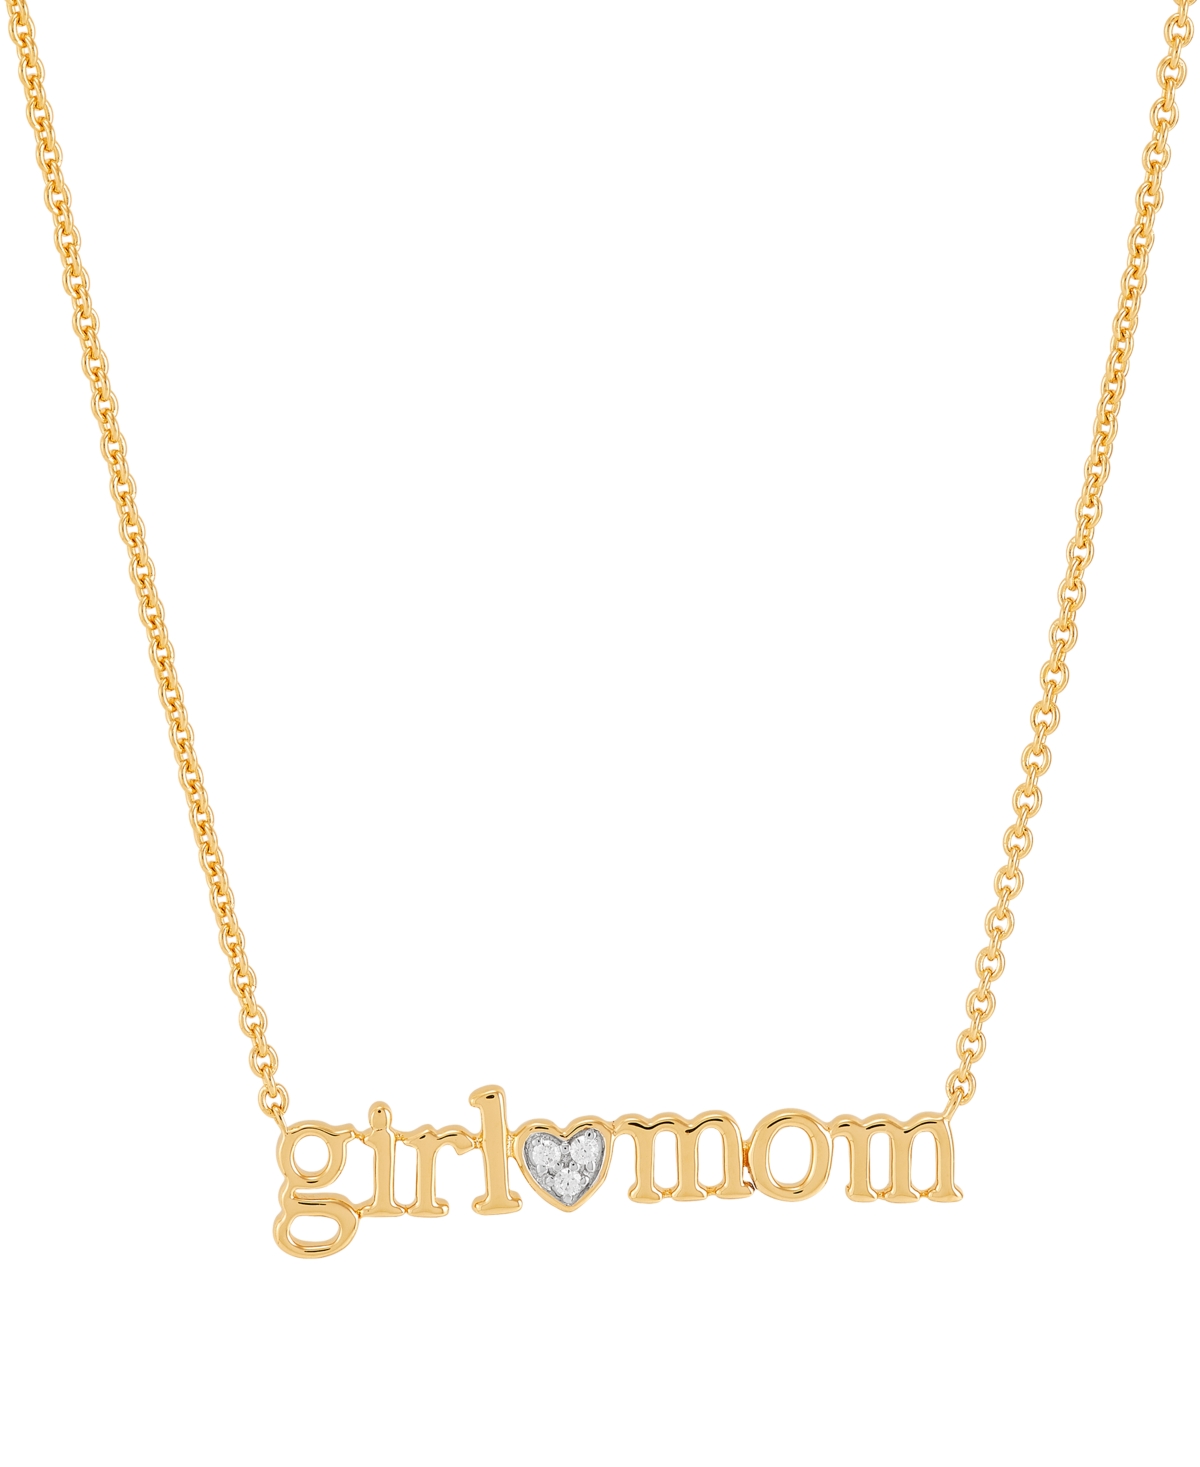 Diamond Accent Girl Mom Pendant Necklace in Sterling Silver or 14k Gold-Plated Sterling Silver, 16" + 2" extender - Gold-Plated Sterling Silver